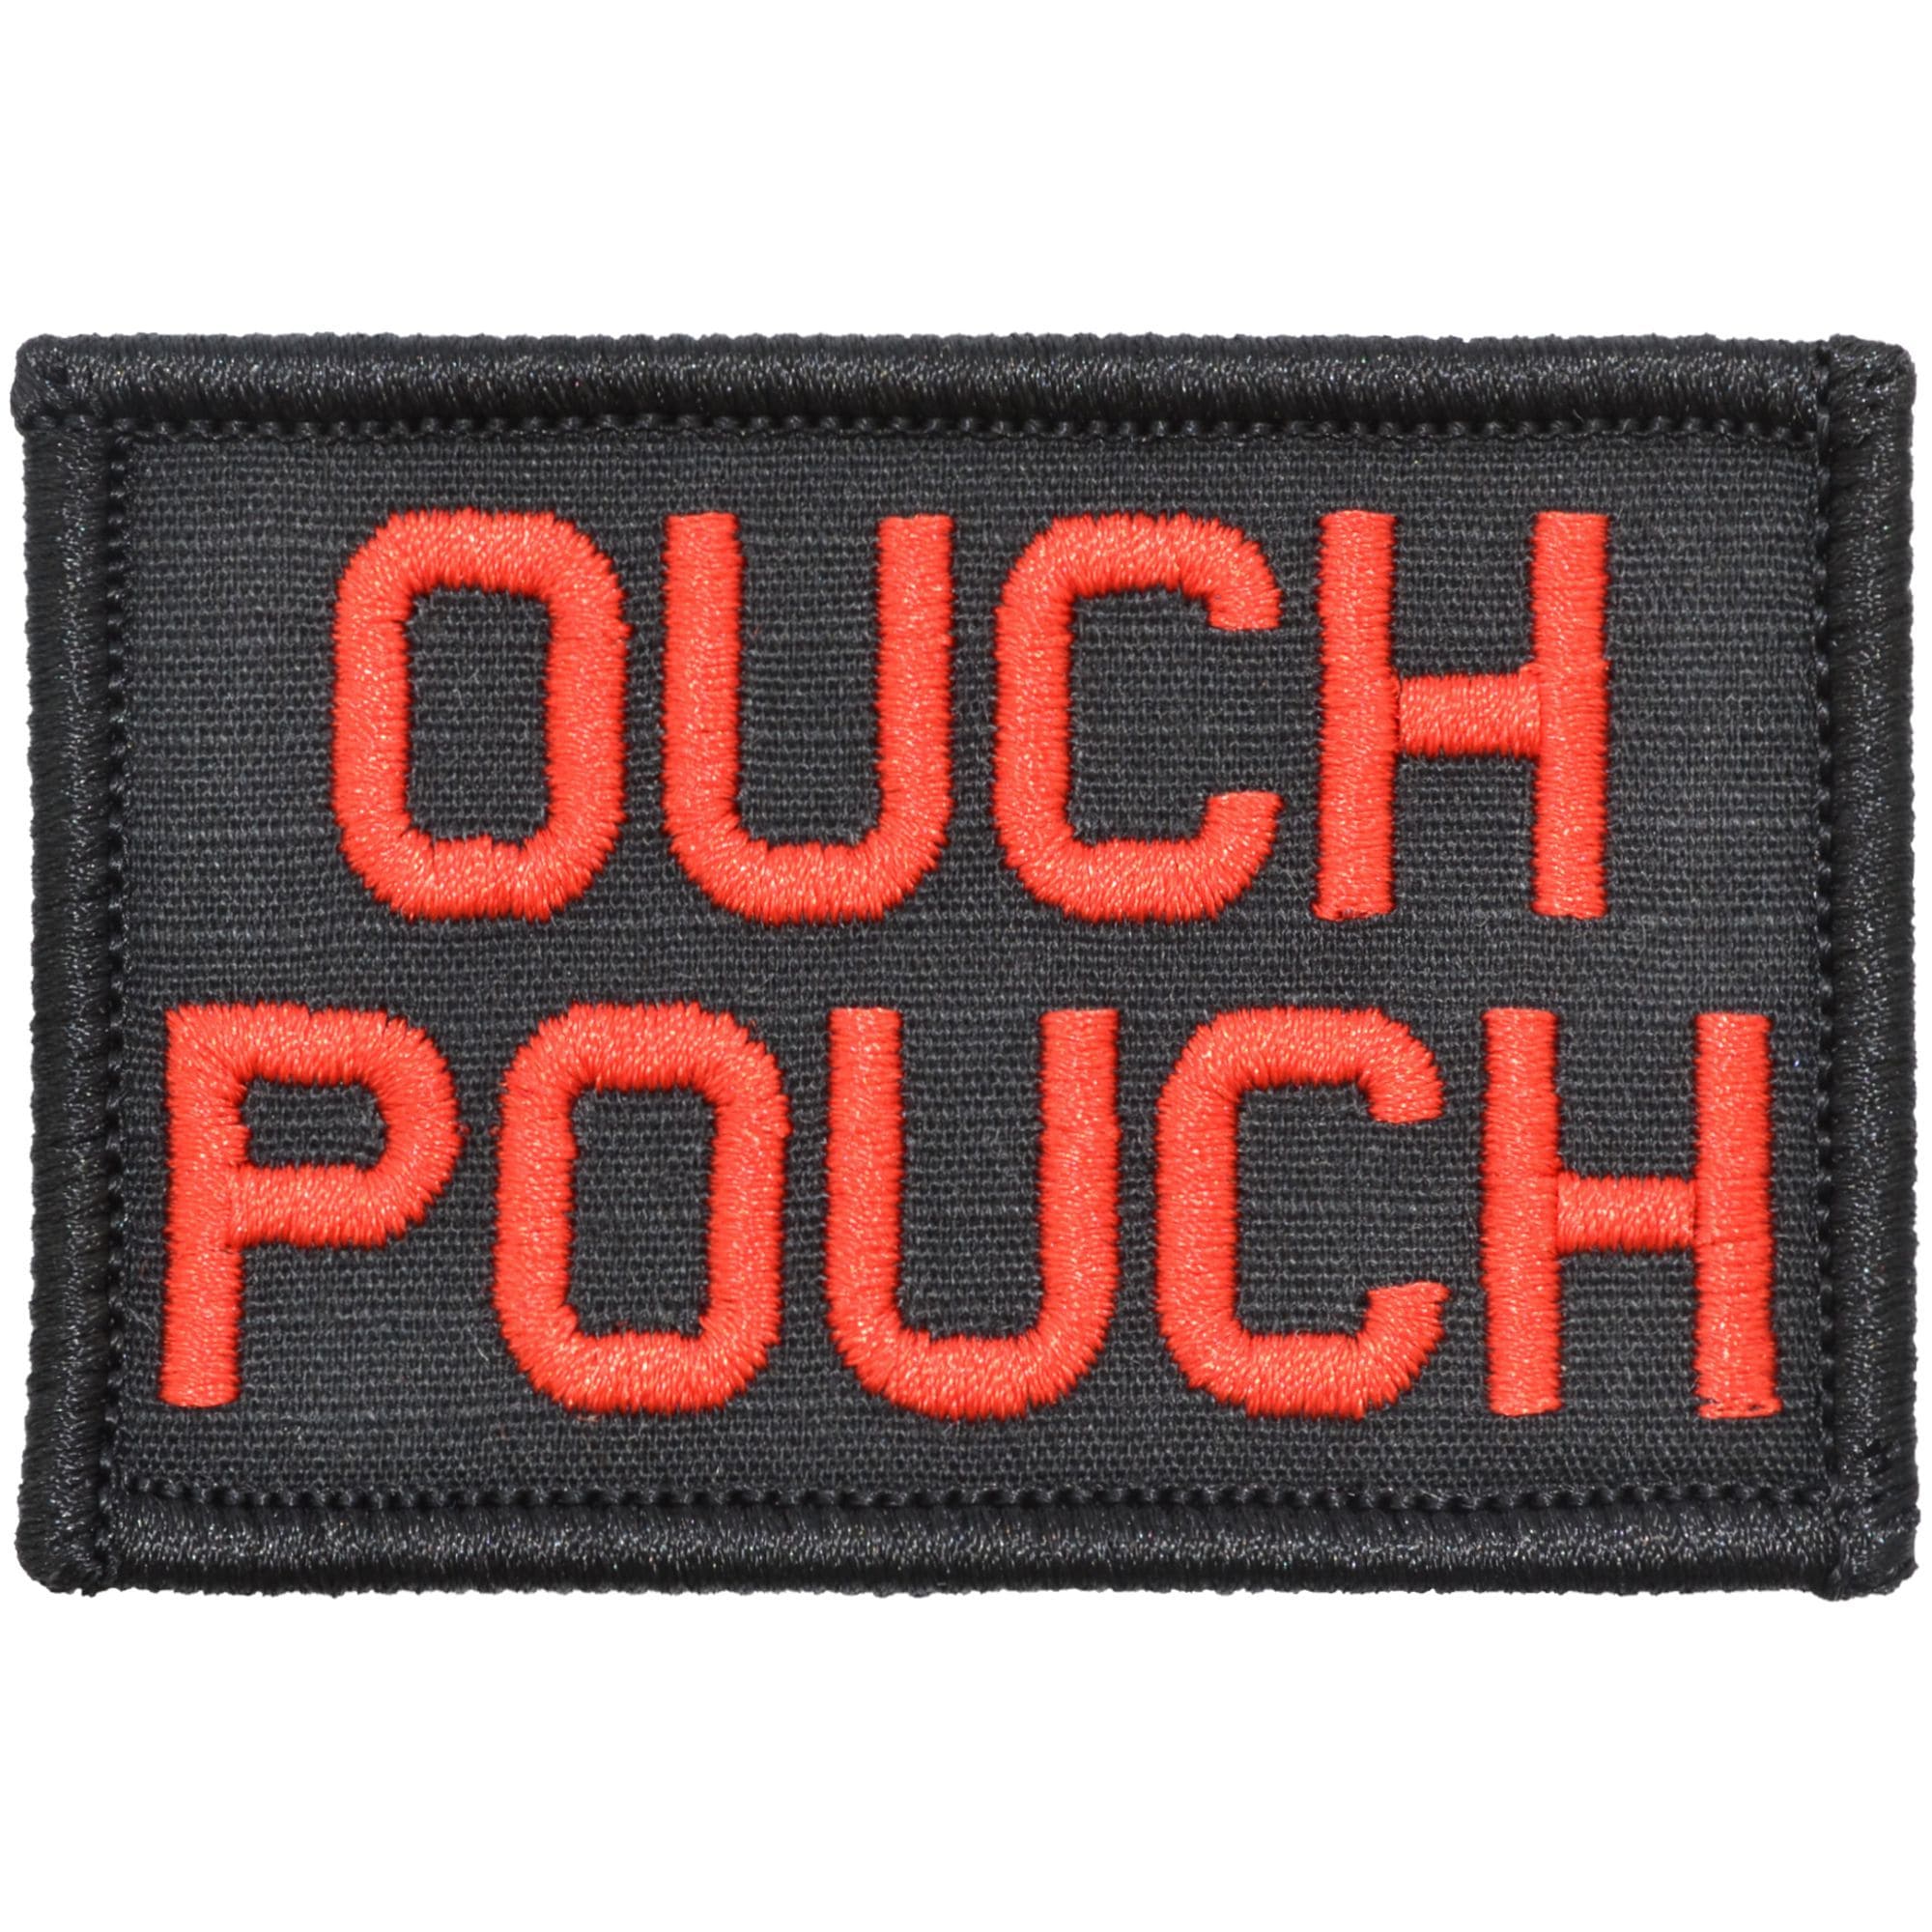 Ouch Pouch velcro Patch, Military Patch, Bag Patch, Tactical Patch 